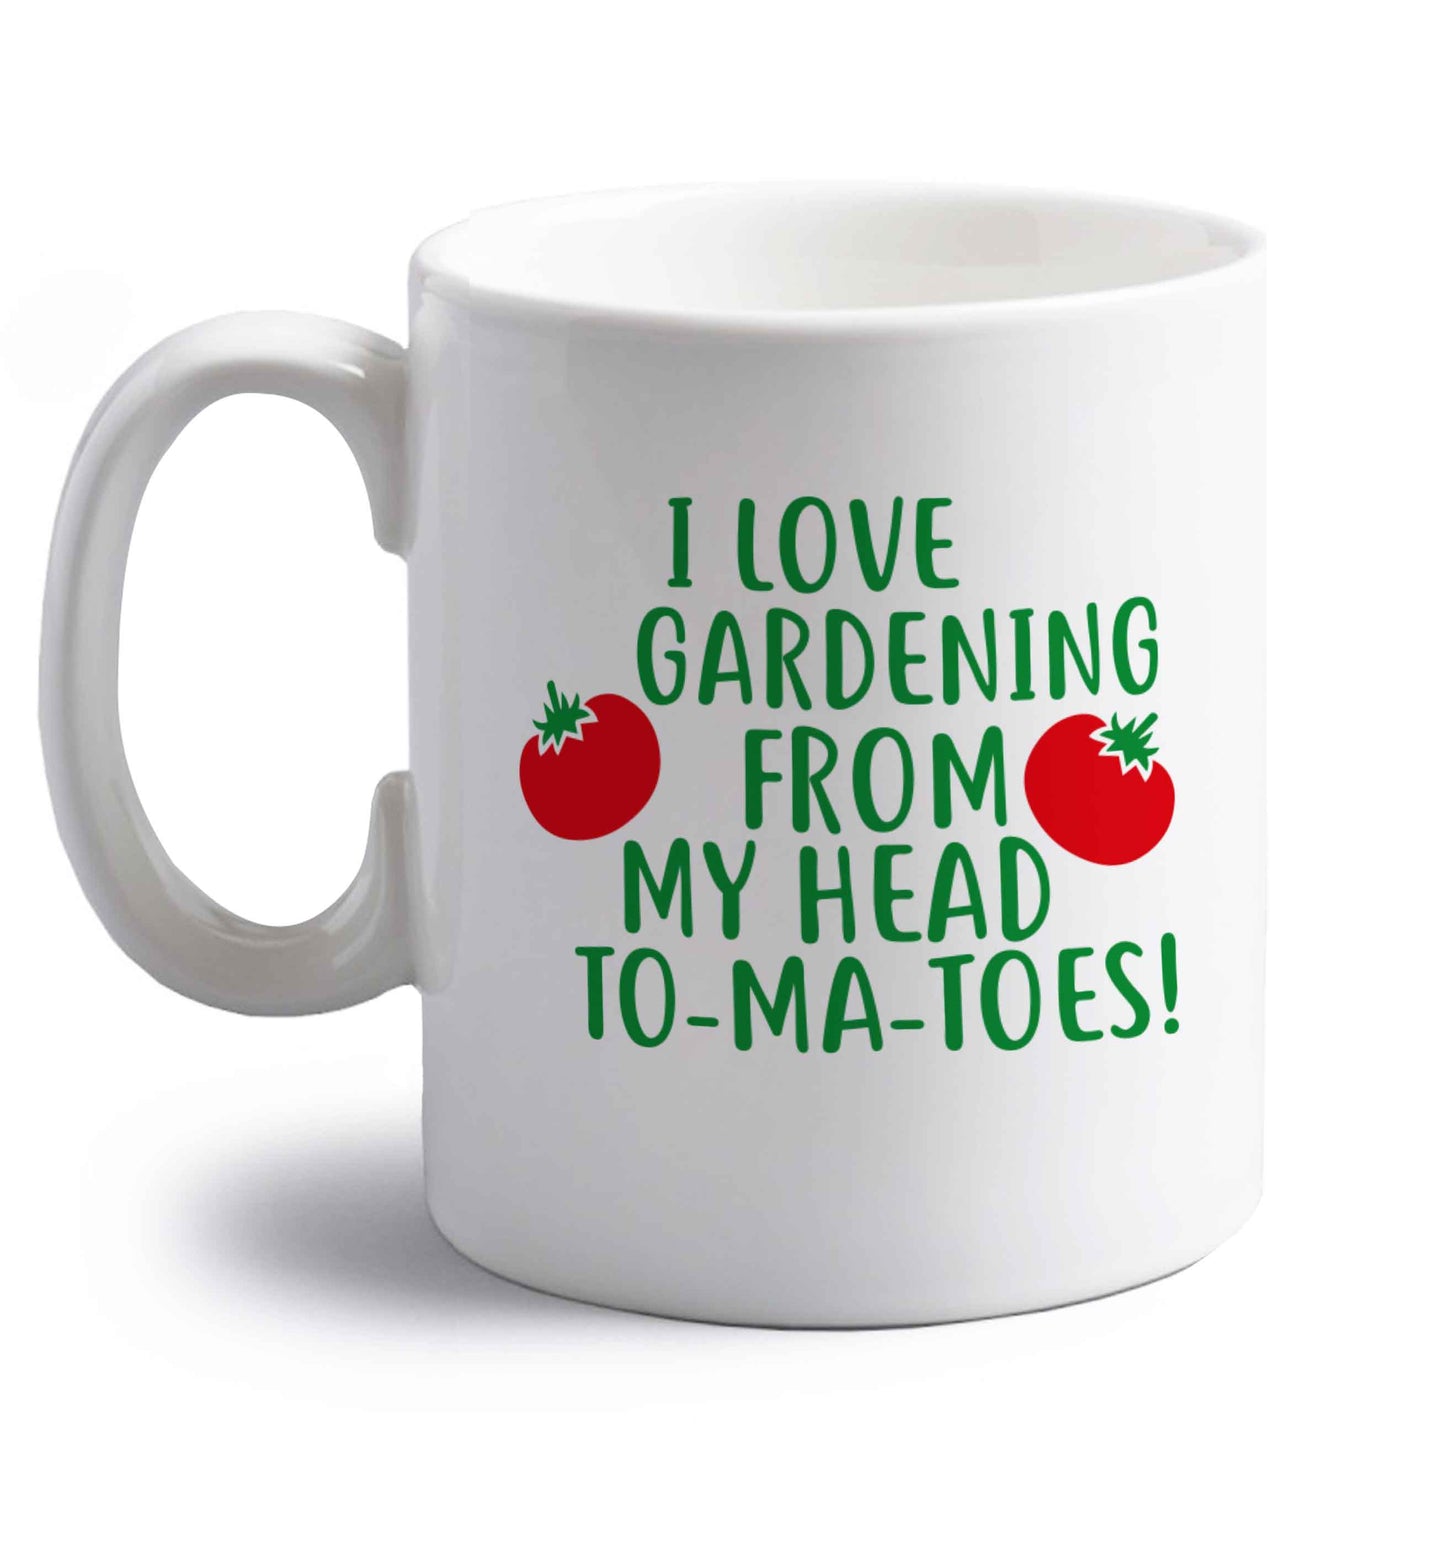 I love gardening from my head to-ma-toes right handed white ceramic mug 